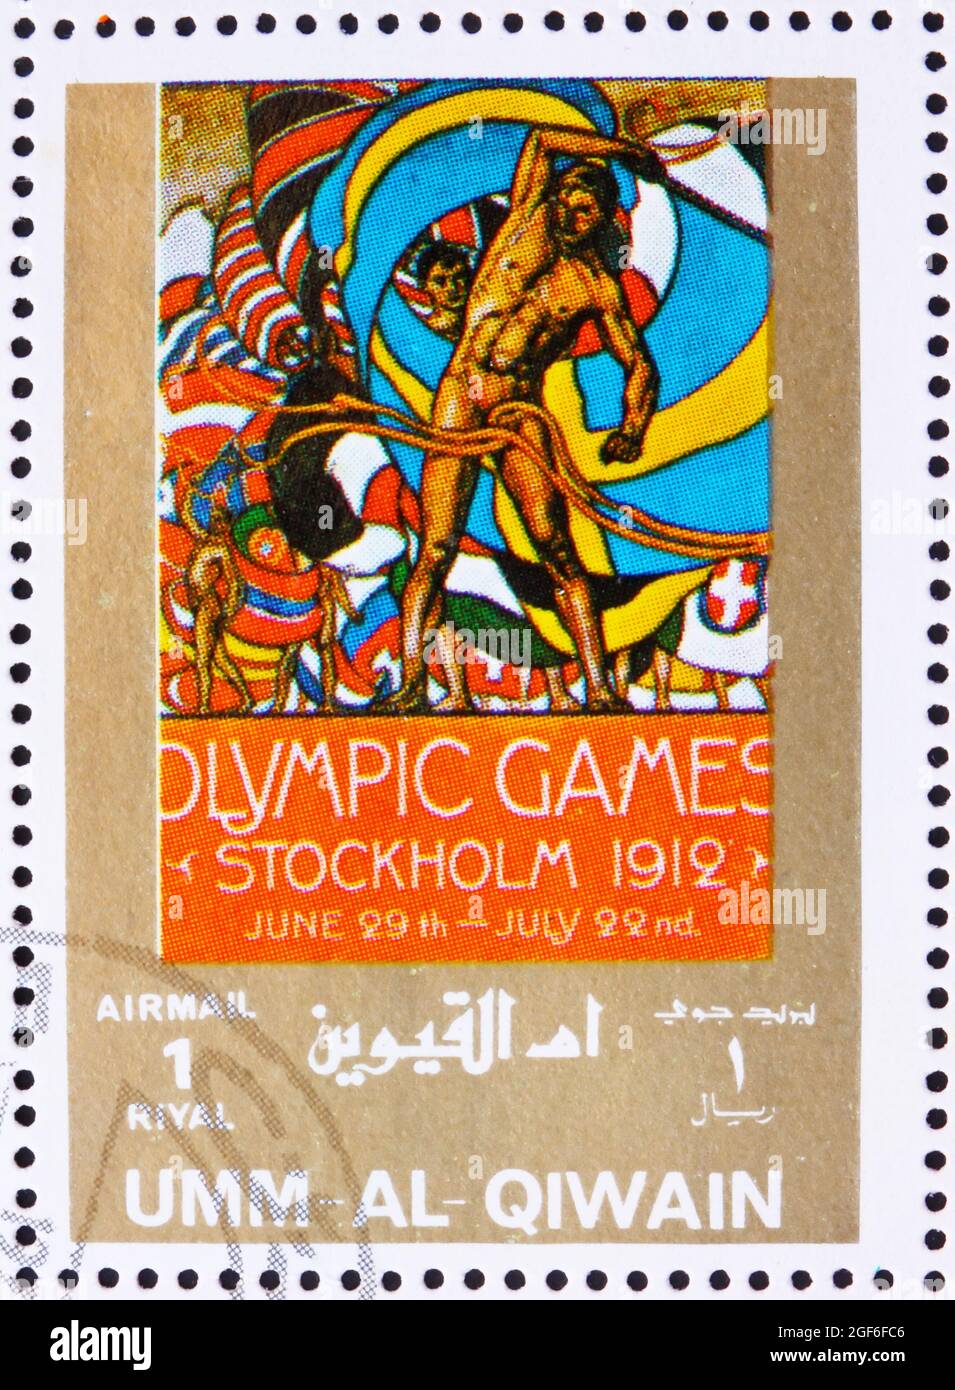 UMM AL-QUWAIN - CIRCA 1972: a stamp printed in the Umm al-Quwain shows Stockholm 1912, Sweden, Olympic Games of the past, circa 1972 Stock Photo